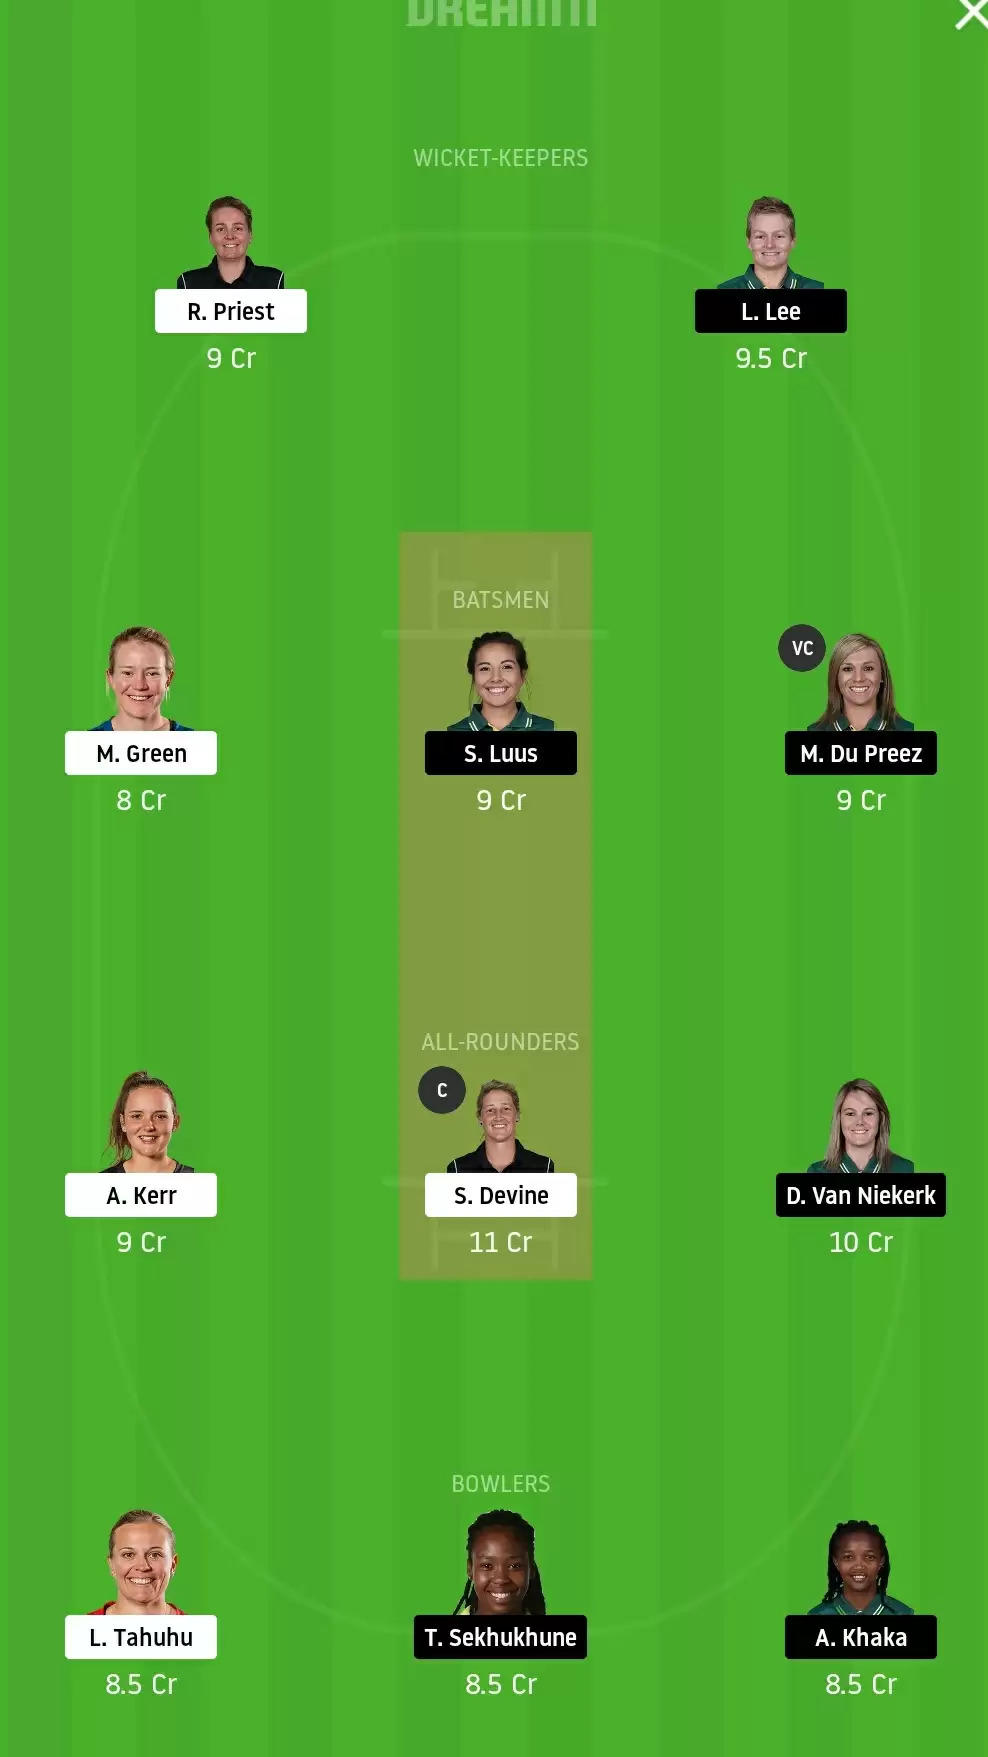 4th T20: NZ-W Vs SA-W Dream11 & MyTeam11 Prediction, Fantasy Cricket Tips, Playing XI, Team, Pitch Report And Weather Conditions